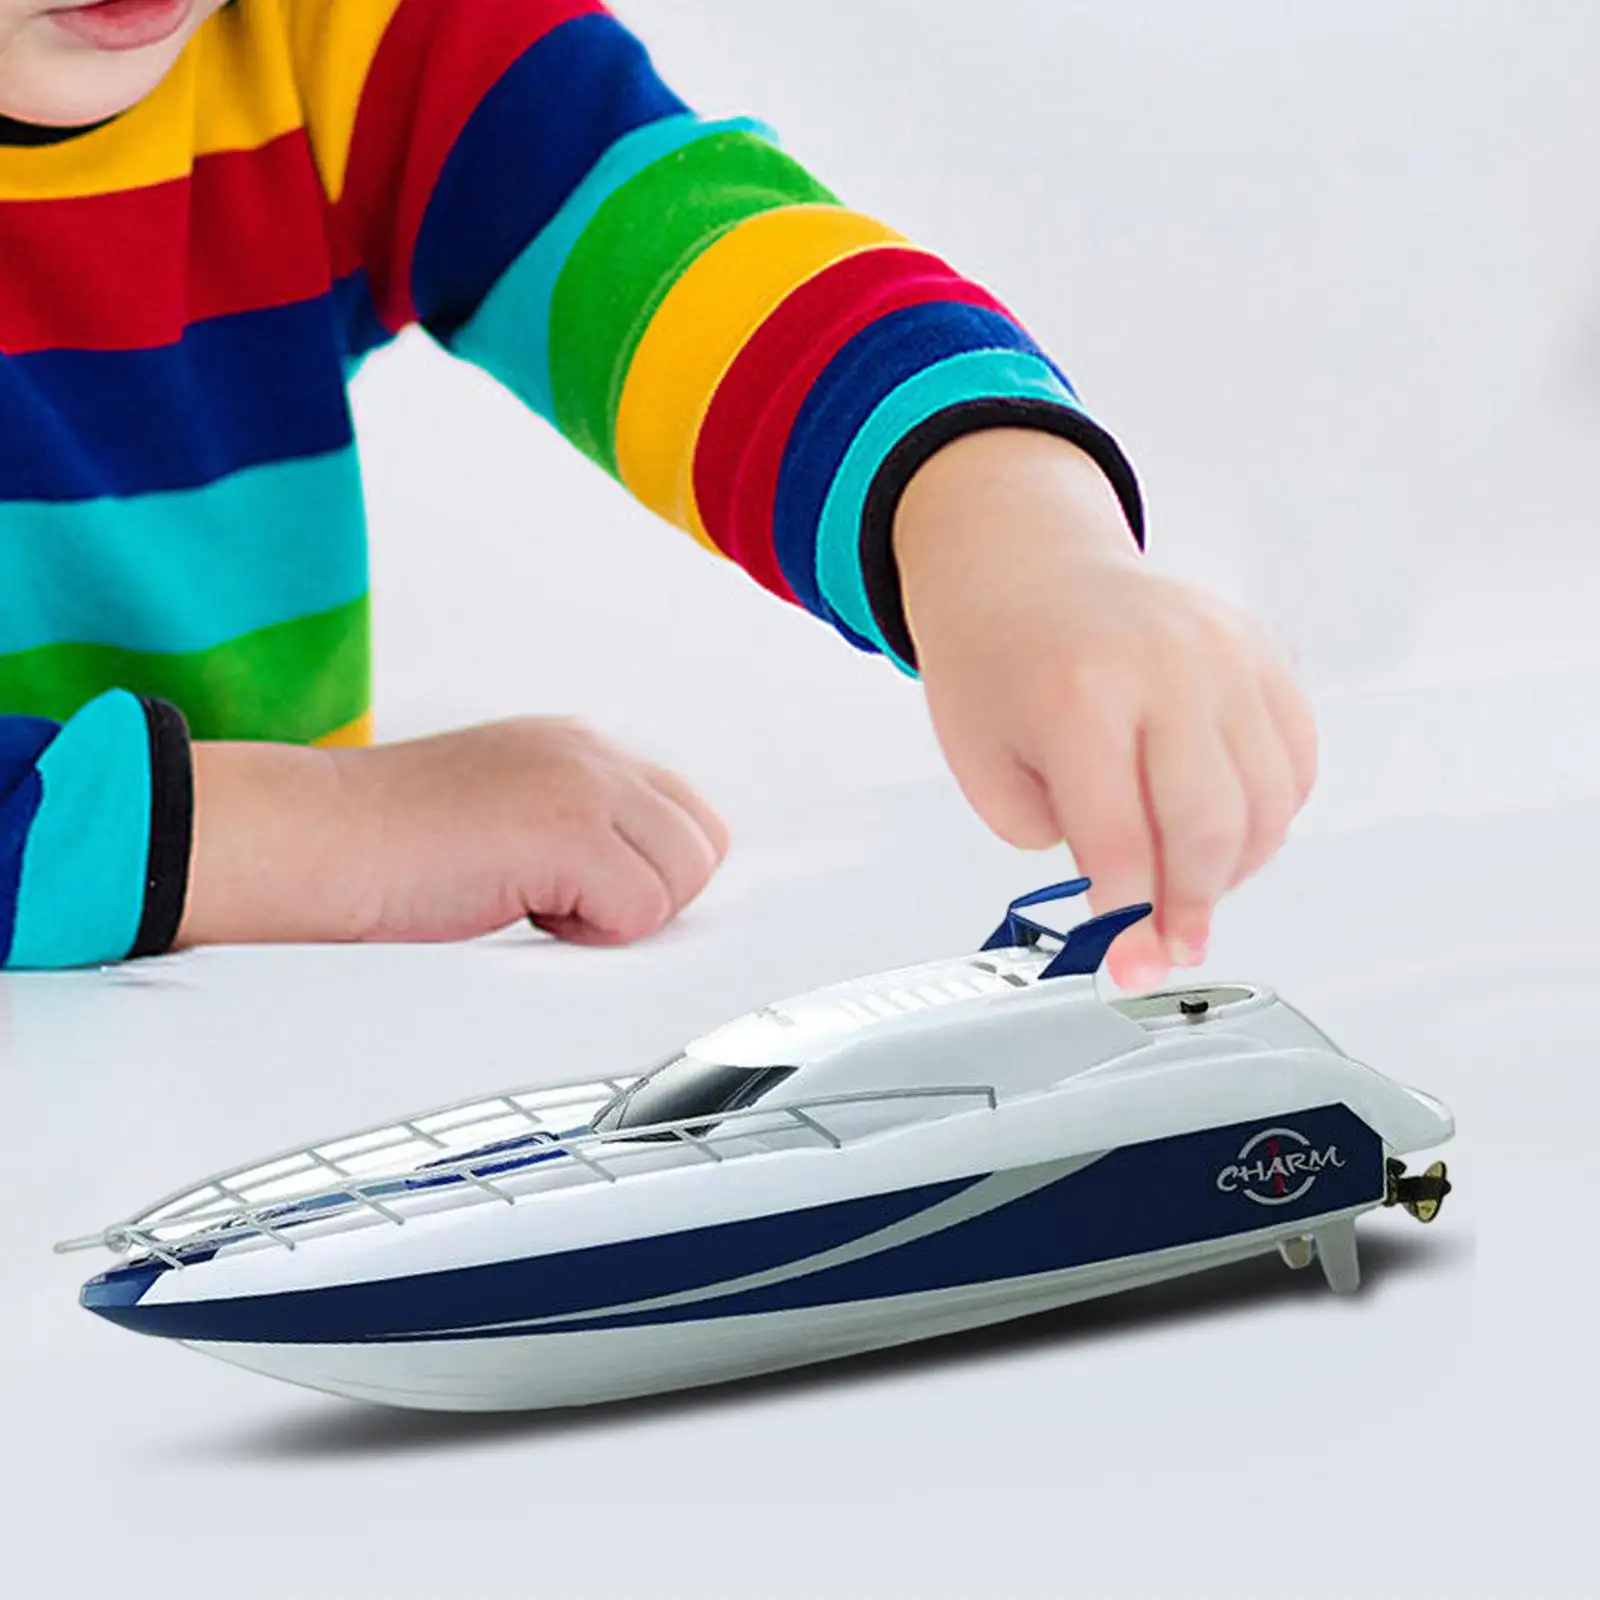 Portable Remote Control Boat Speedboat USB Rechargeable RC Boat Warship Model for Beginner Boys Adults Children Birthday Gifts